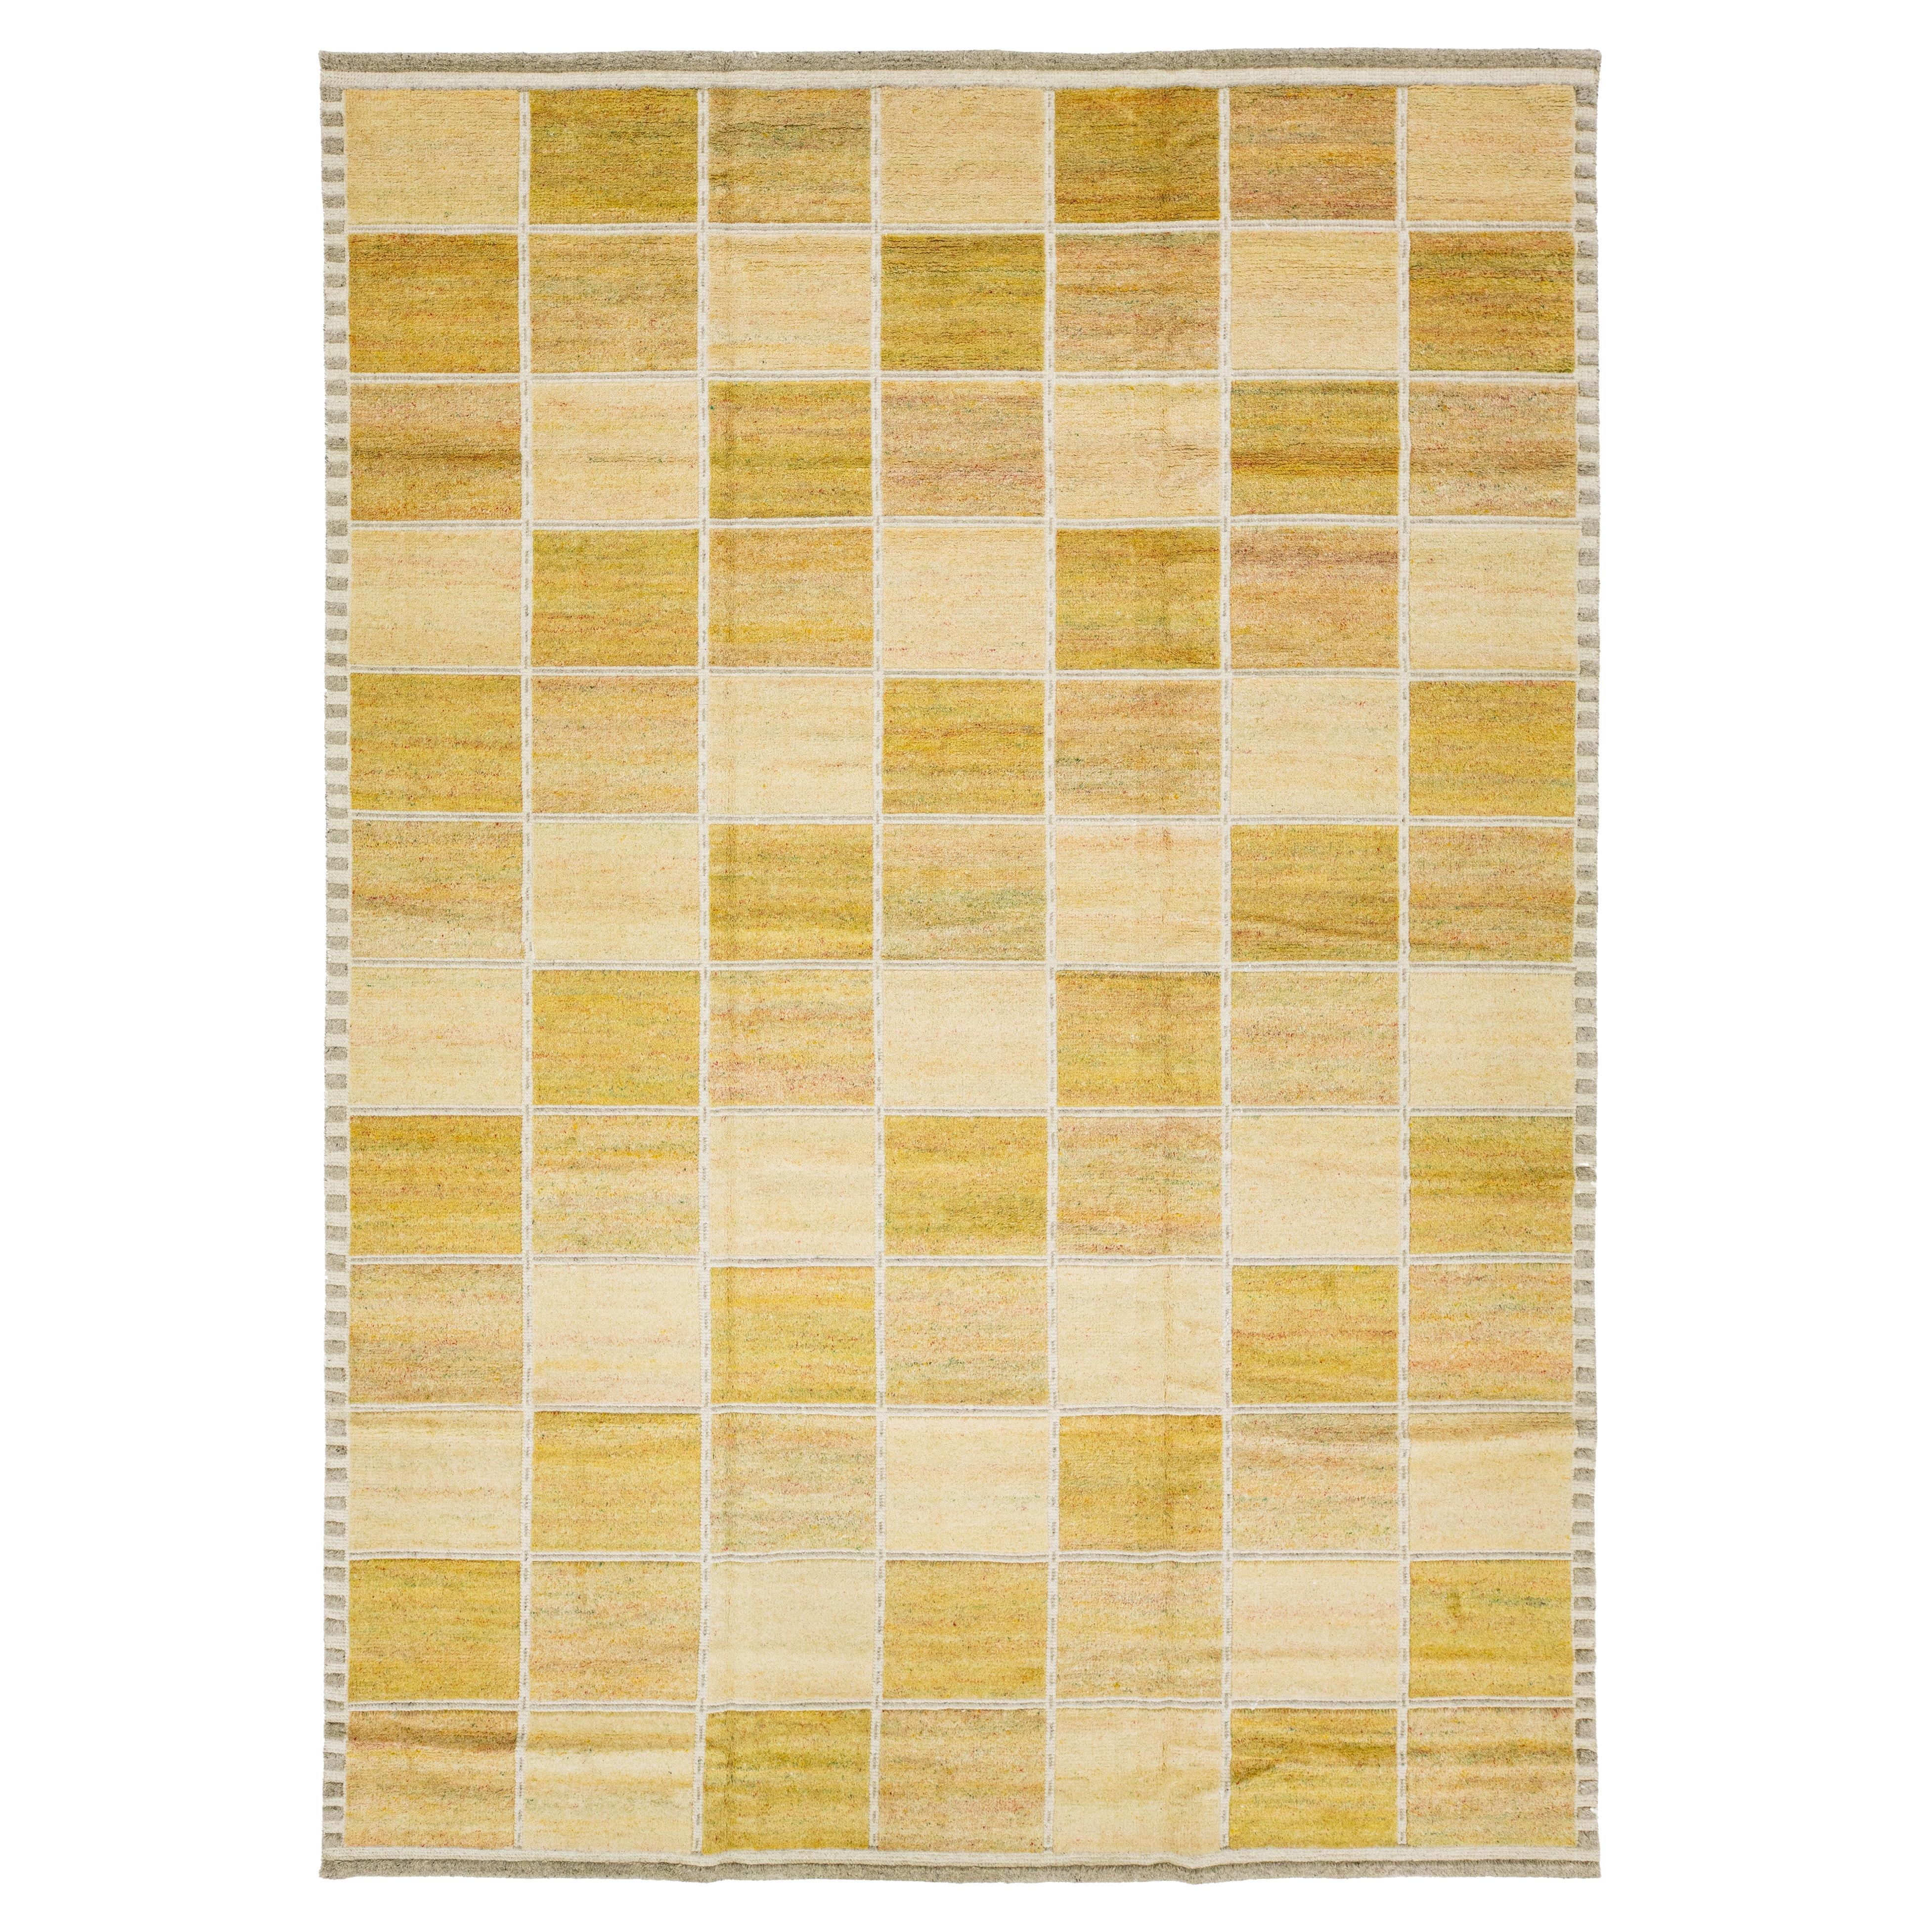  High-low Contemporary Scandinavian Style Wool Rug In Yellow and Beige Tones